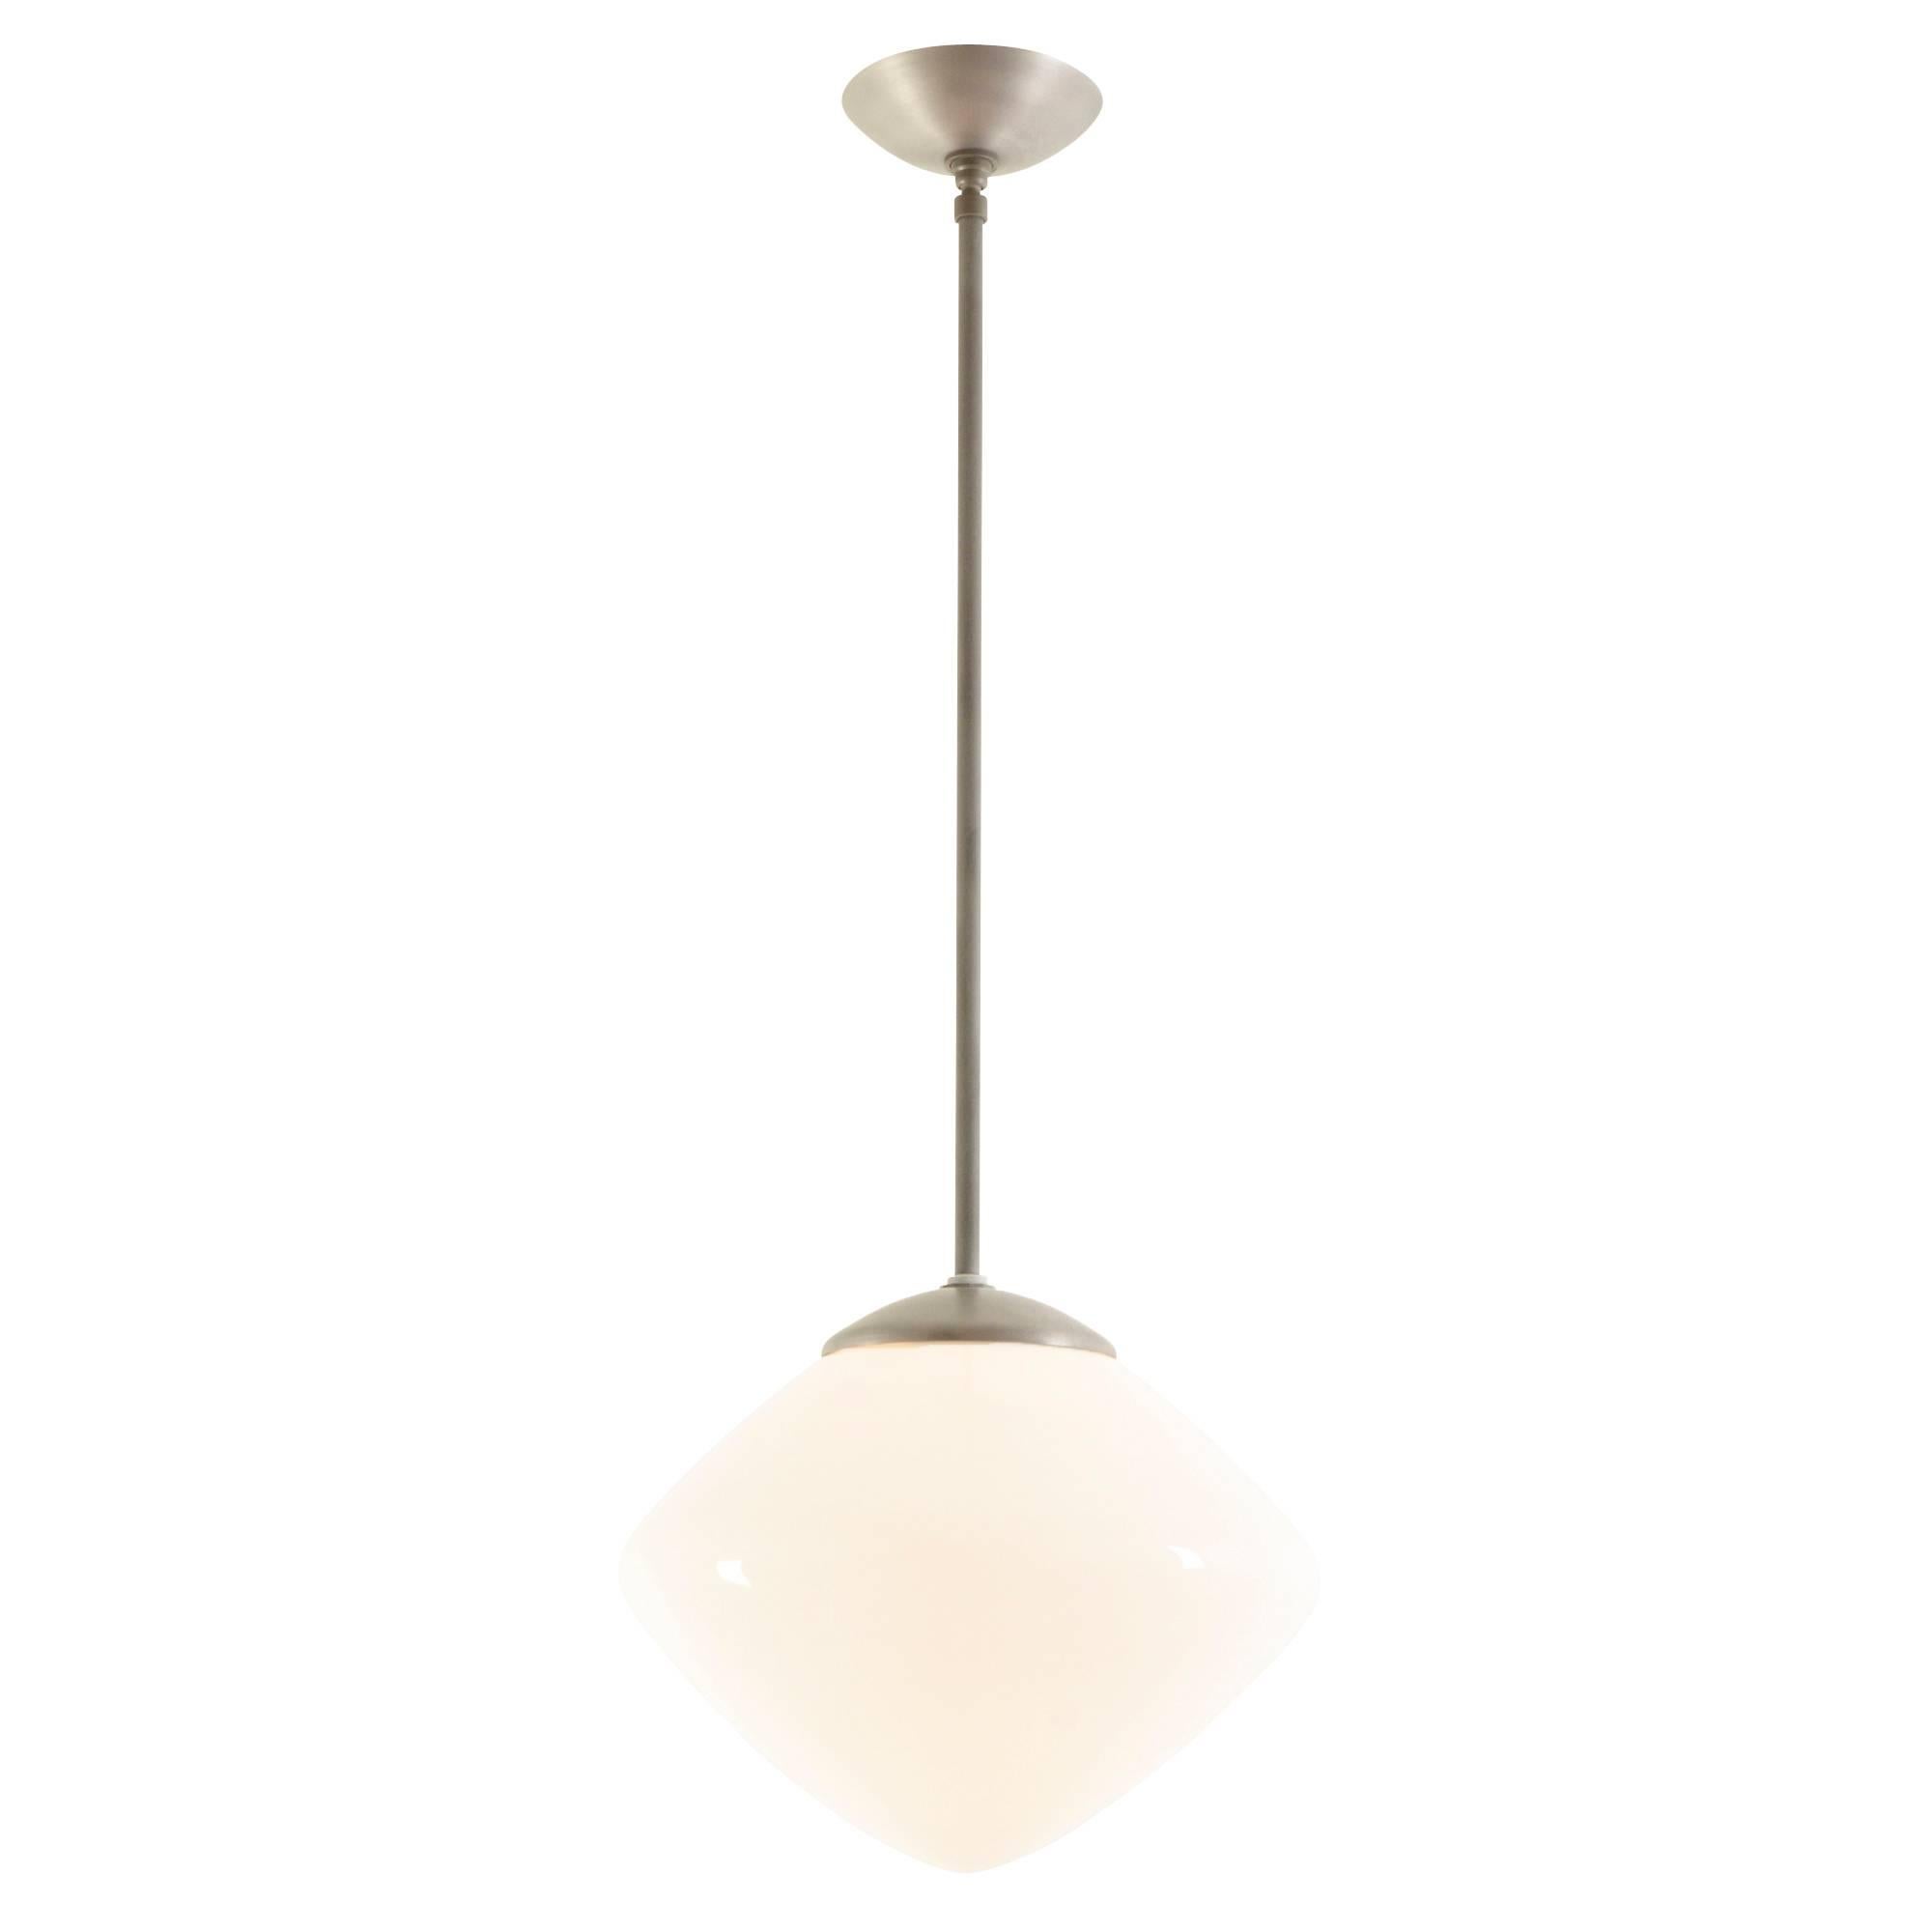 Likely found dotting the interior of a large warehouse or manufacturing space, these particular Industrial pendants came out of a local high school in Portland and offer more than just period utilitarian charm. With a fabulously shaped shade and